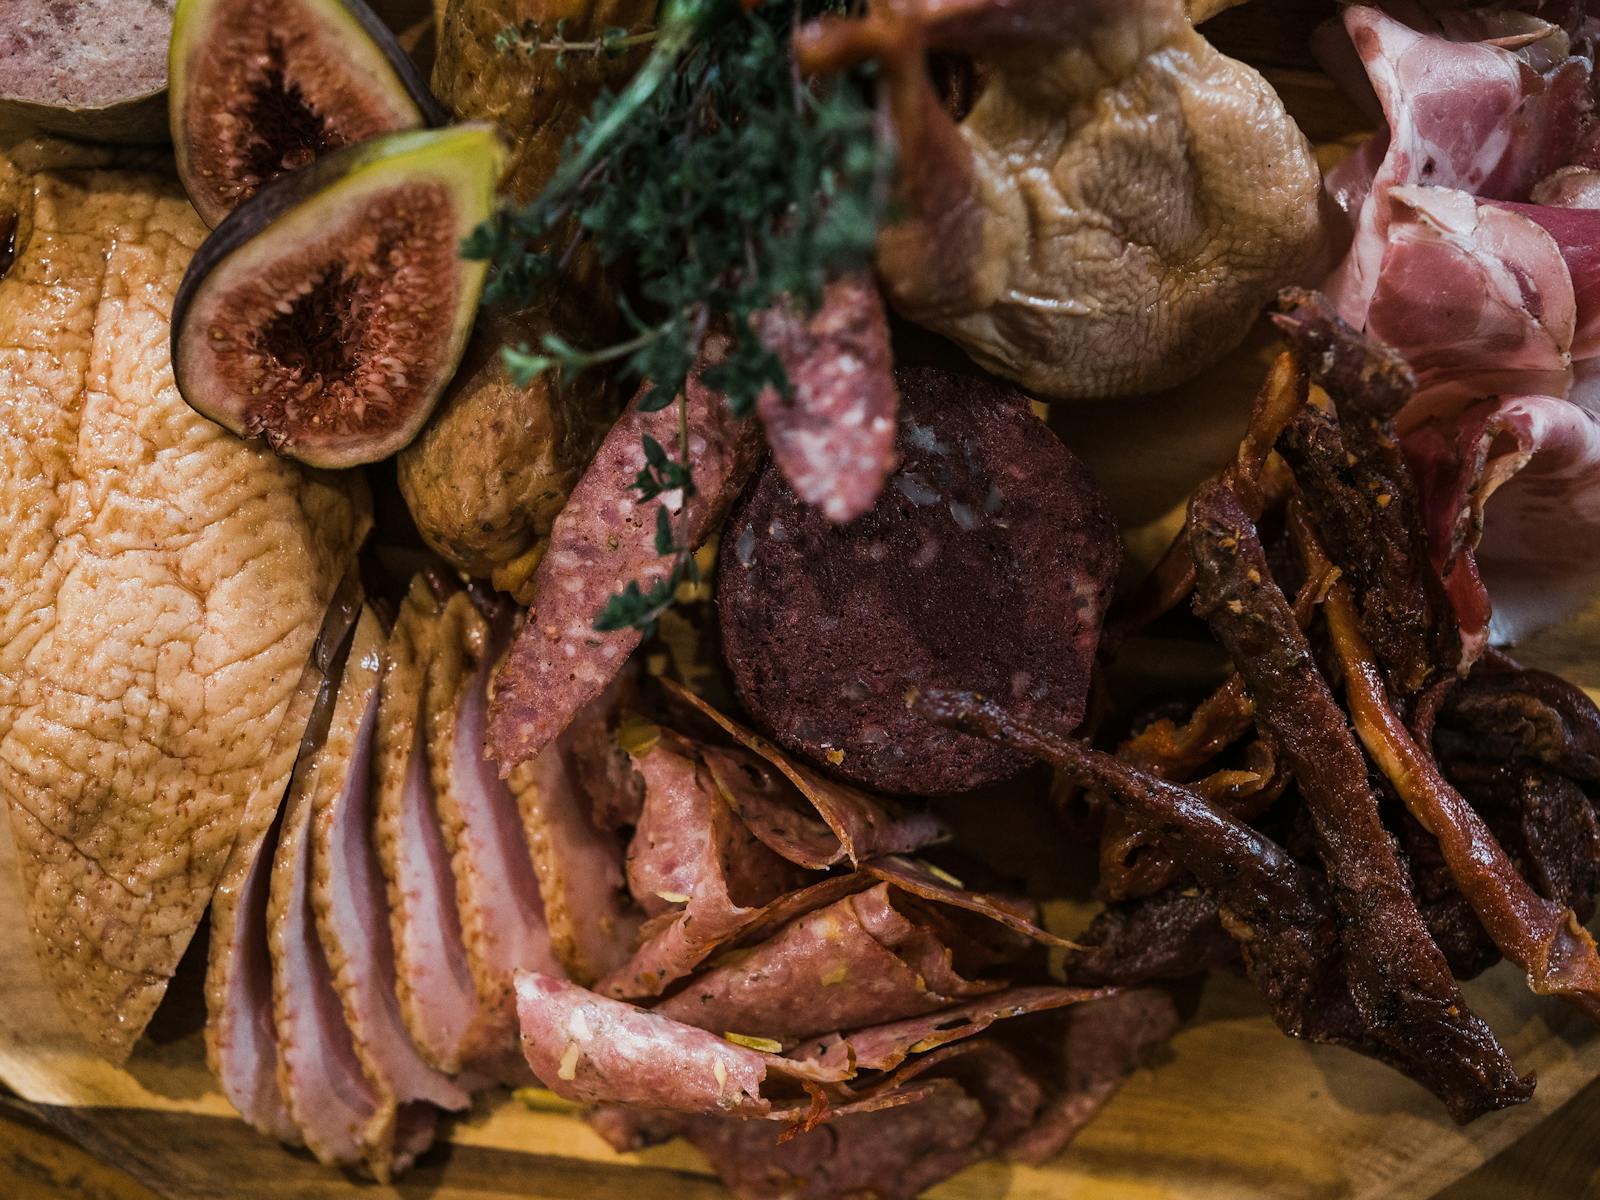 Image shows platter of gourmet smallgoods meats